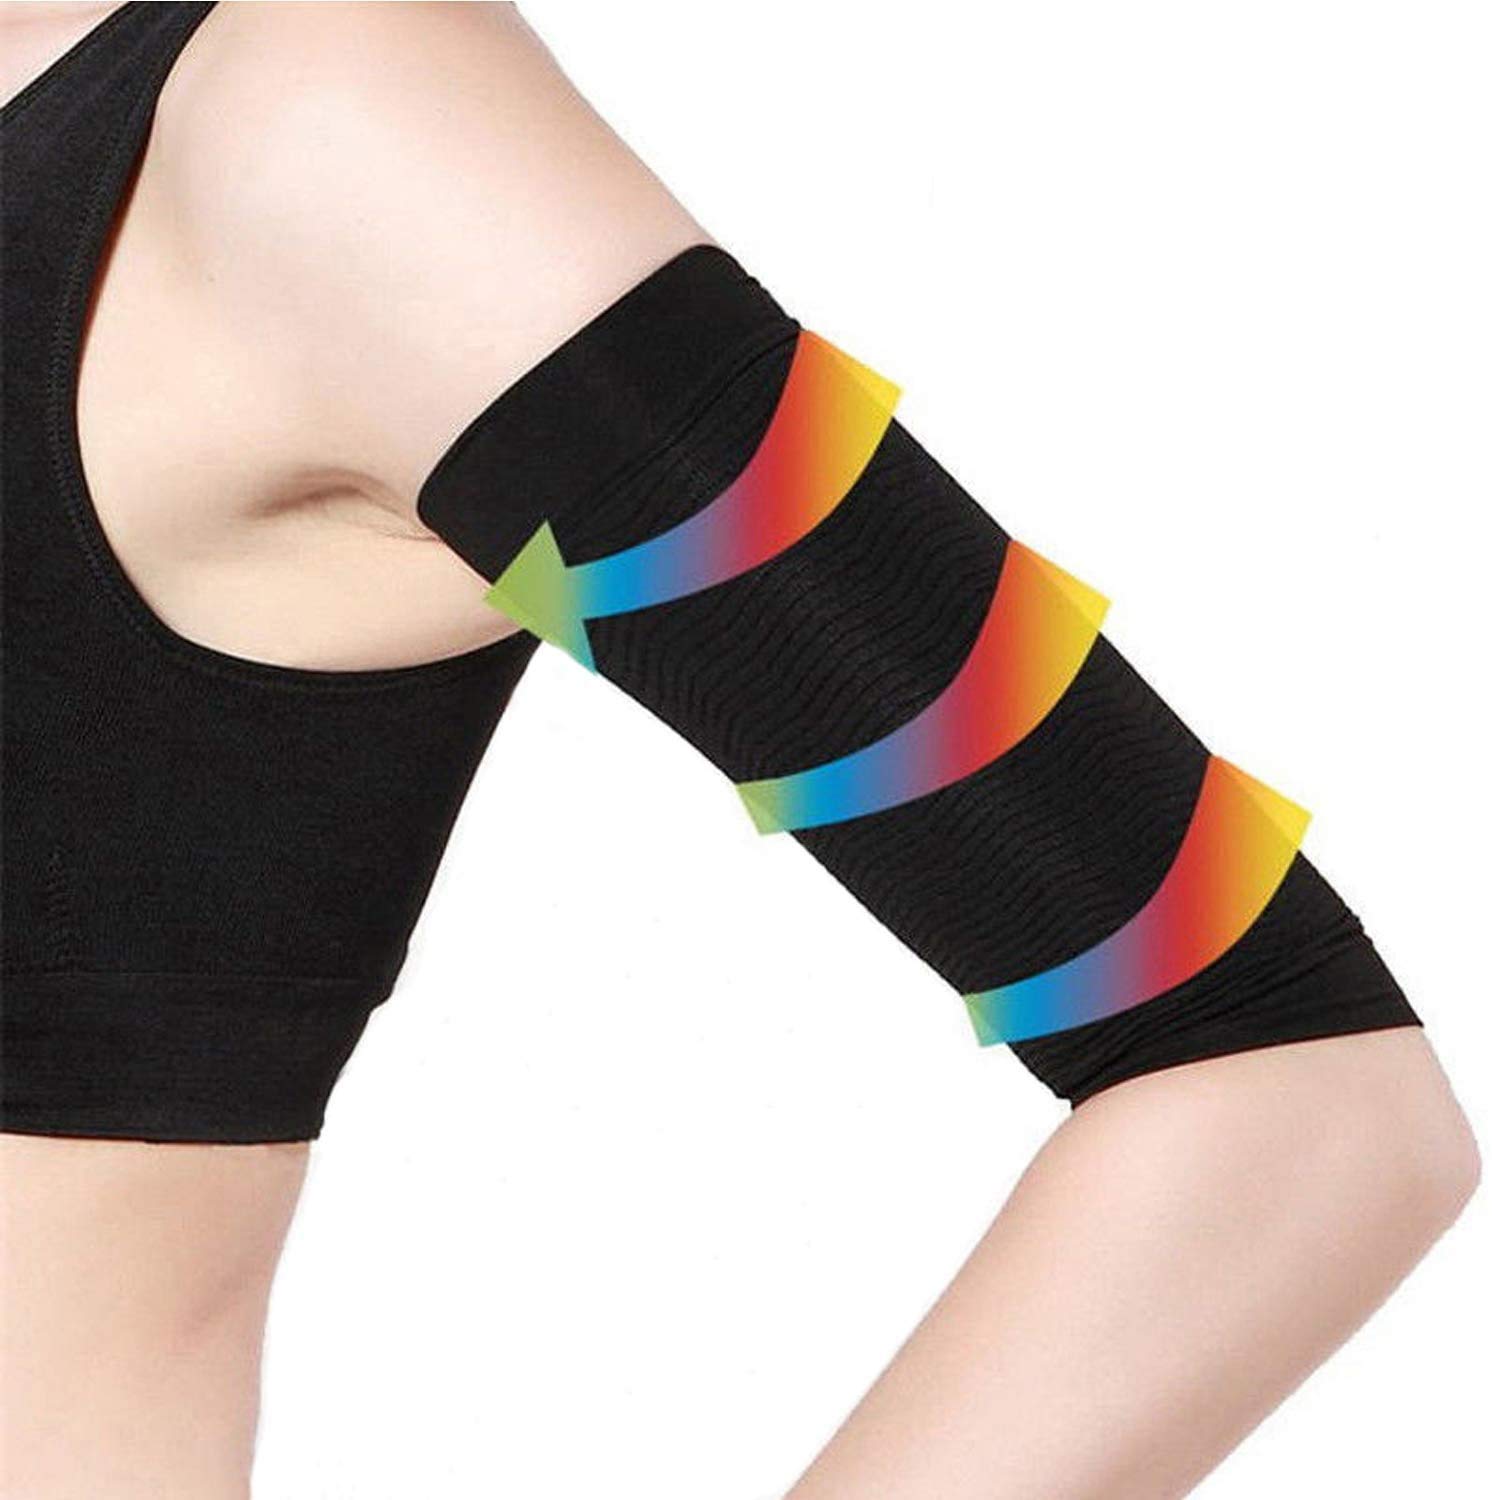 New 2 Style Women Arm Thinner Compression Arm Shapers Back